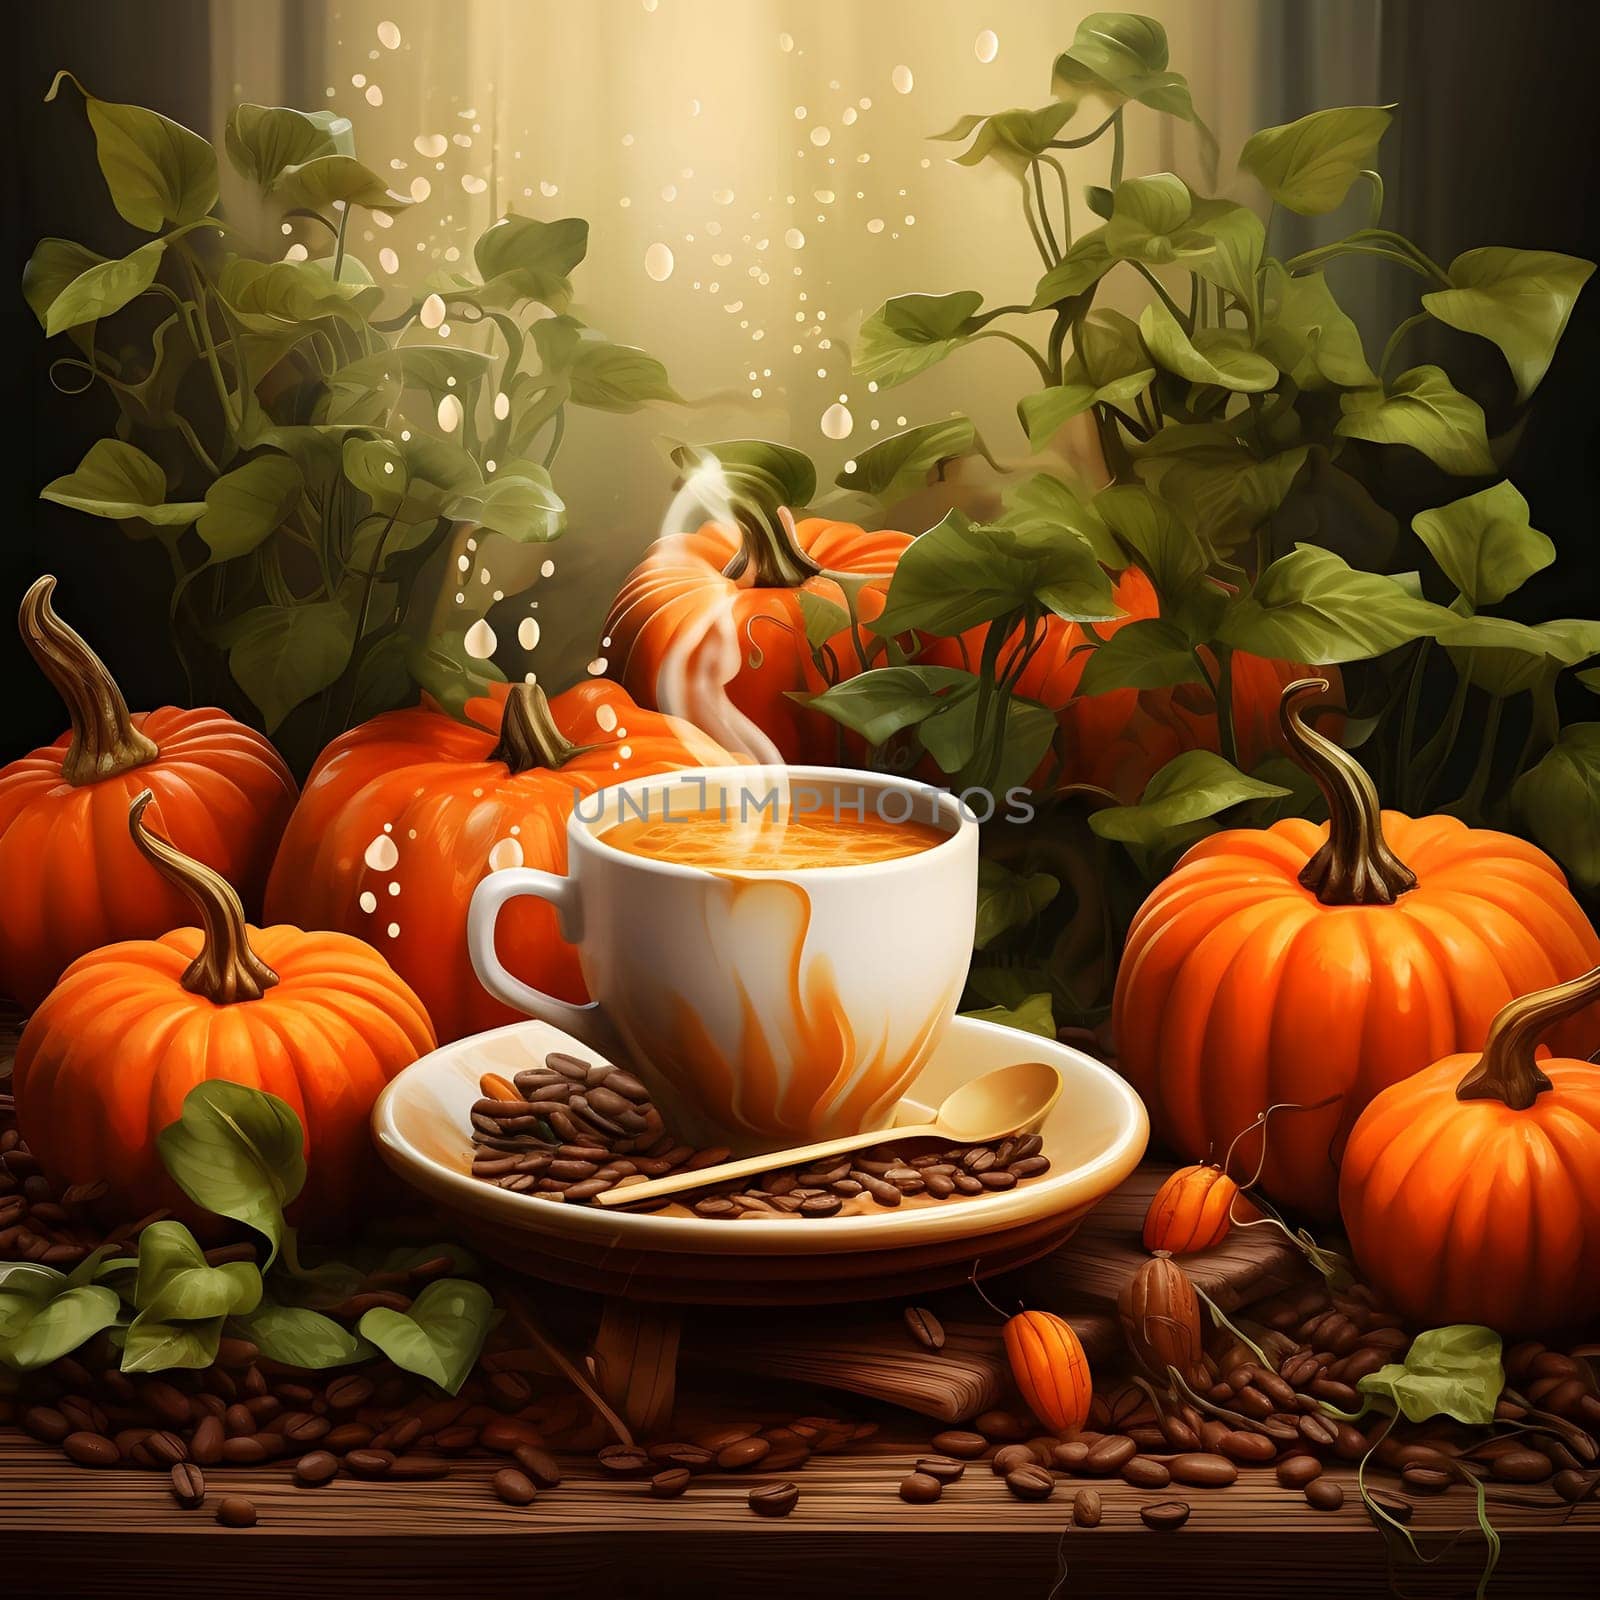 Illustration; a glass of hot pumpkin soup, around seeds, wooden top, leaves and pumpkins. Pumpkin as a dish of thanksgiving for the harvest. An atmosphere of joy and celebration.